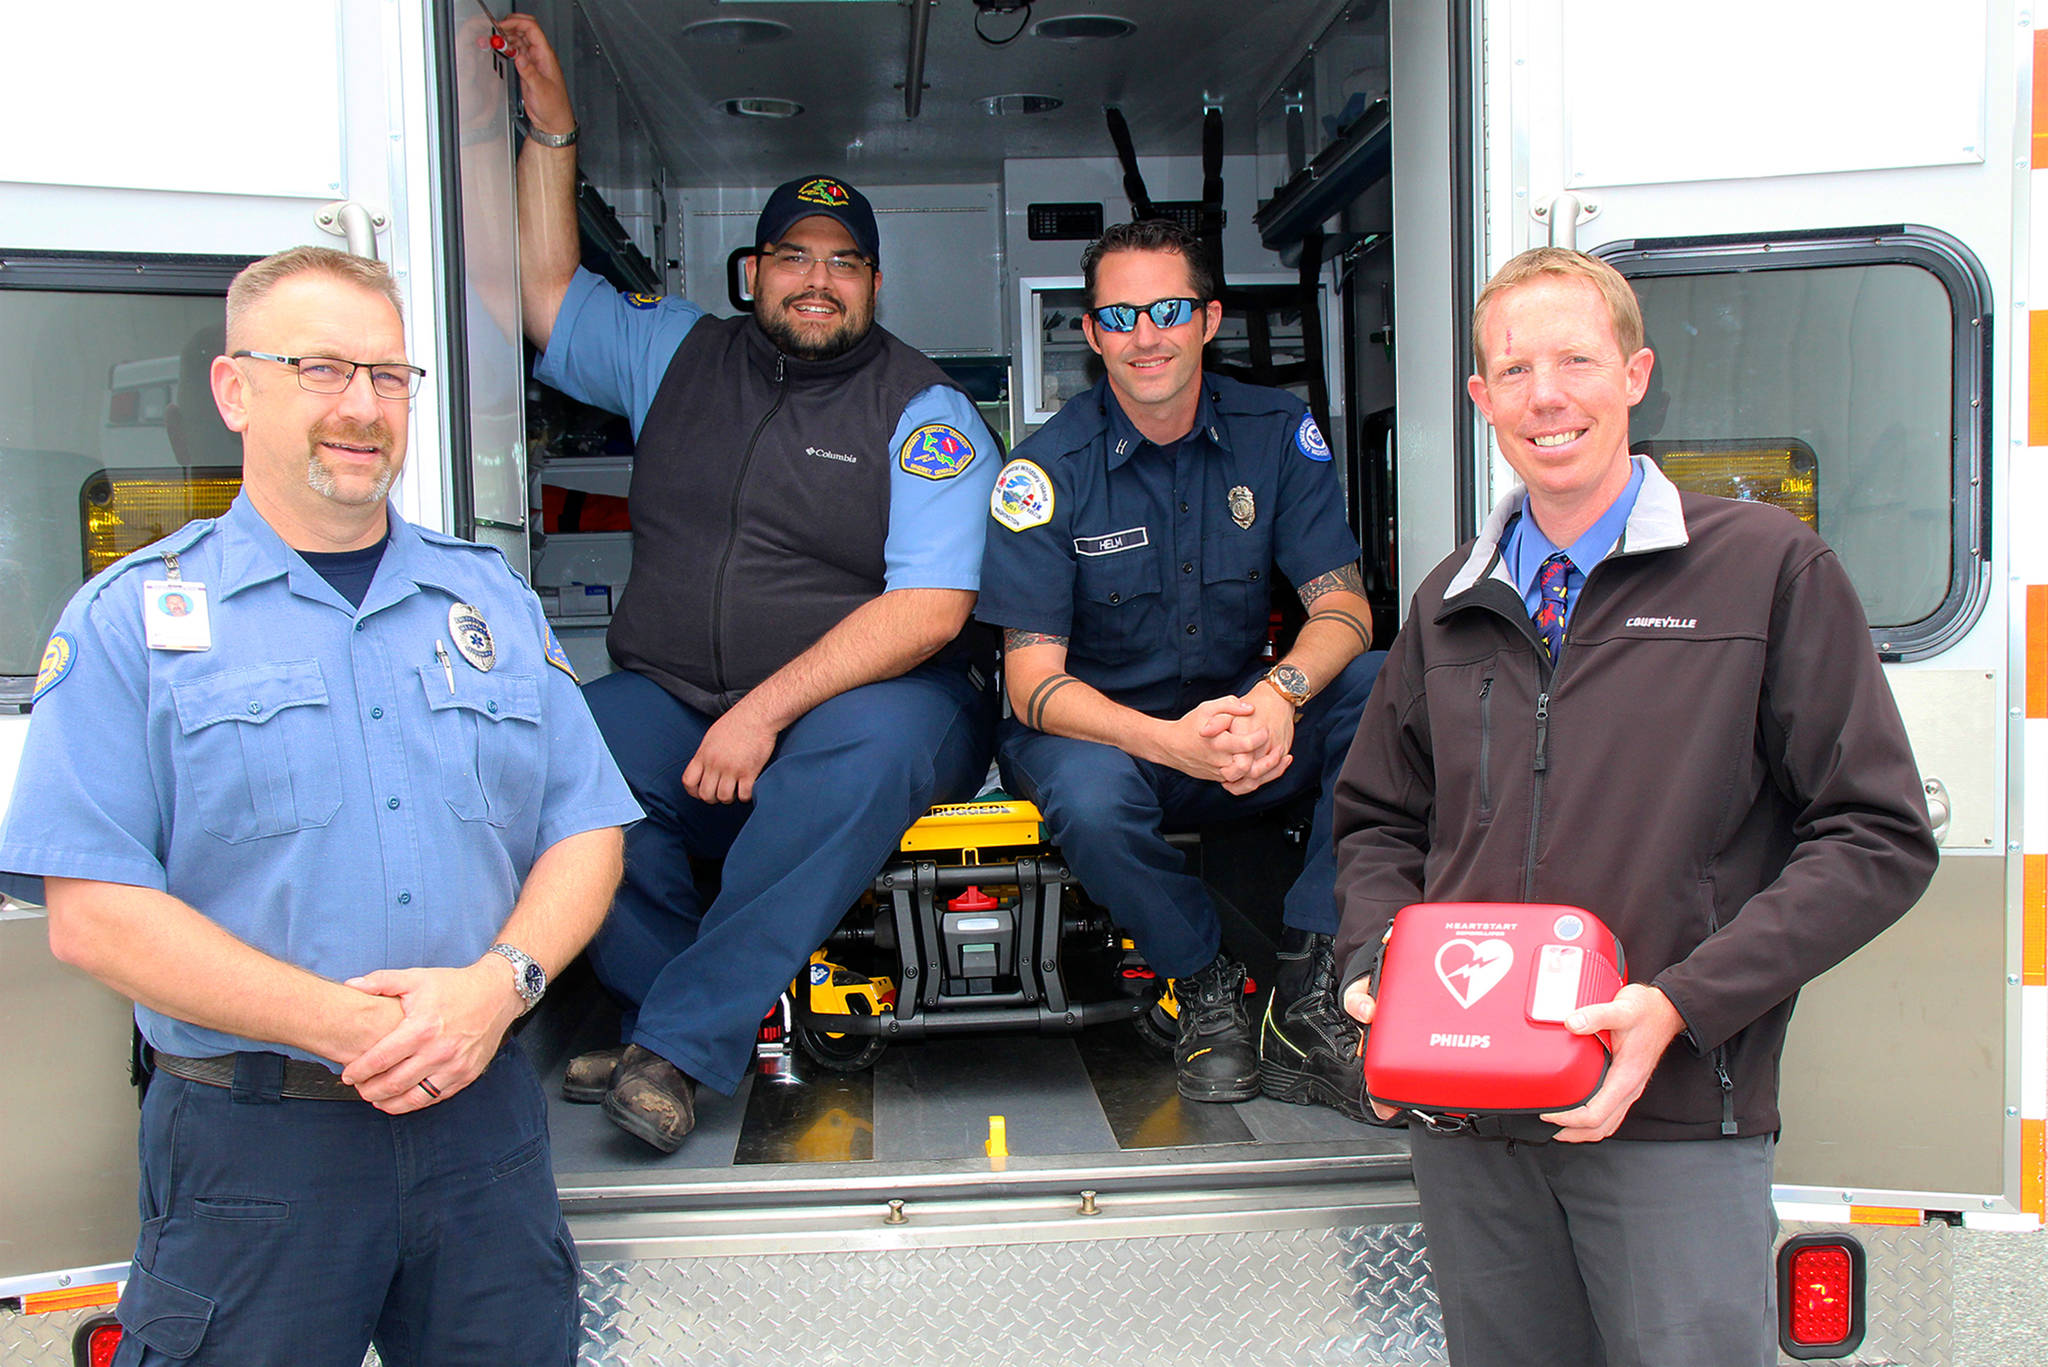 Coupeville teacher and South Whidbey firefighter Jon Gabelein, far right, meets with first responders whom he says represent collaboration among agencies on the island. Gabelein was recently involved in helping to save a woman using an AED, one of which he is holding. From left are Gregory Behan, an EMT with WhidbeyHealth, Scott Jackson, a paramedic, and Capt. Jerry Helm with Coupeville Fire & Rescue.